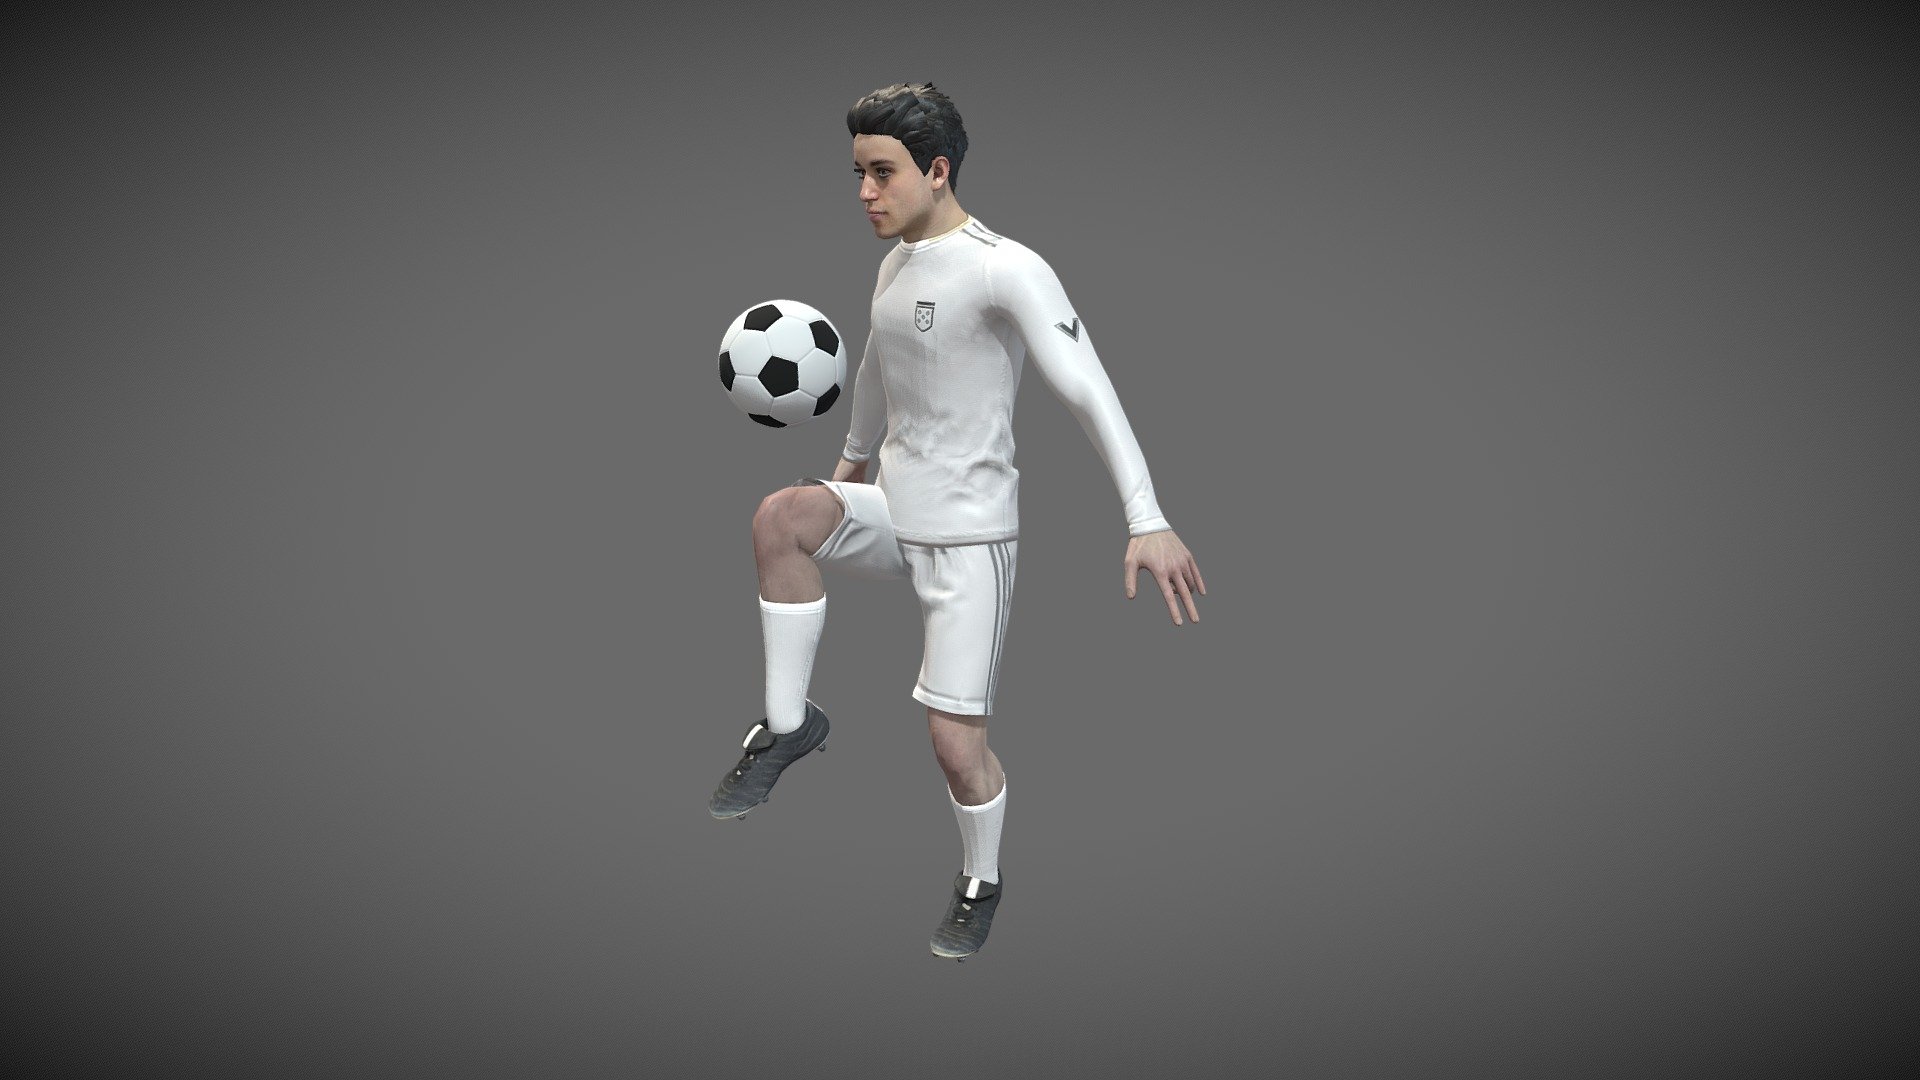 Football player warms up by kneeing ball in this looping animation at 30 frames per second.

See this 3D model in action, and more models like it, here in this collection of free augmeneted reality apps:

https://morpheusar.com/ - Looping Animation Soccer Player Kneeing Football - 3D model by LasquetiSpice 3d model